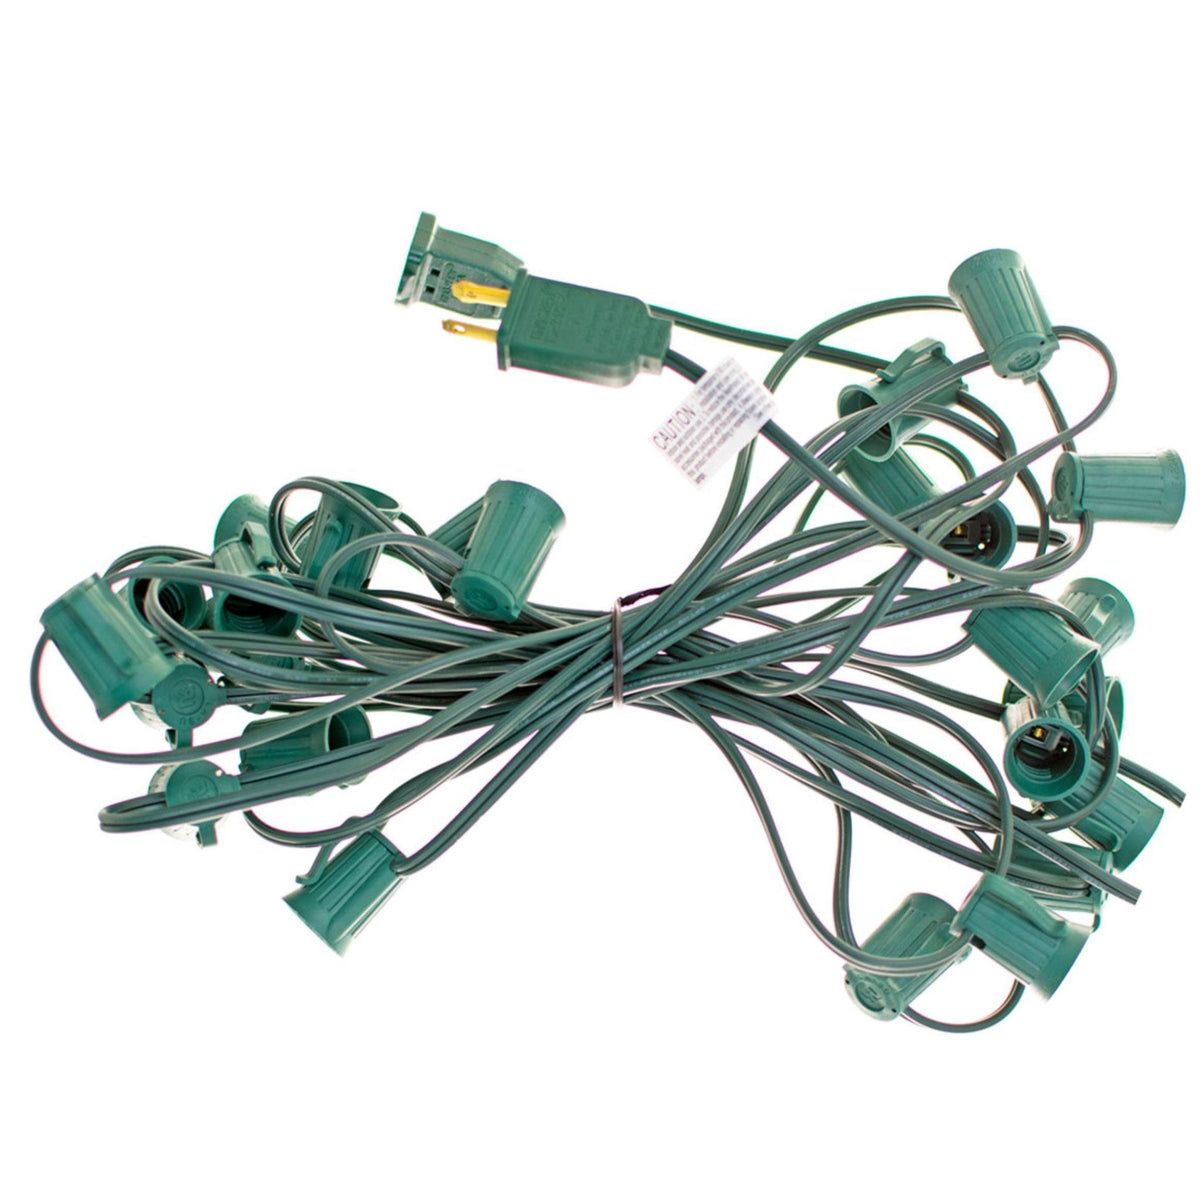 25FT Blue Outdoor String Lighting Set!    Choose between Twinkling Bulbs and Steady Burning Bulbs, White Wire or Green Wire Cords, C7 & C9 Size available.  On sale at leedisplay.com